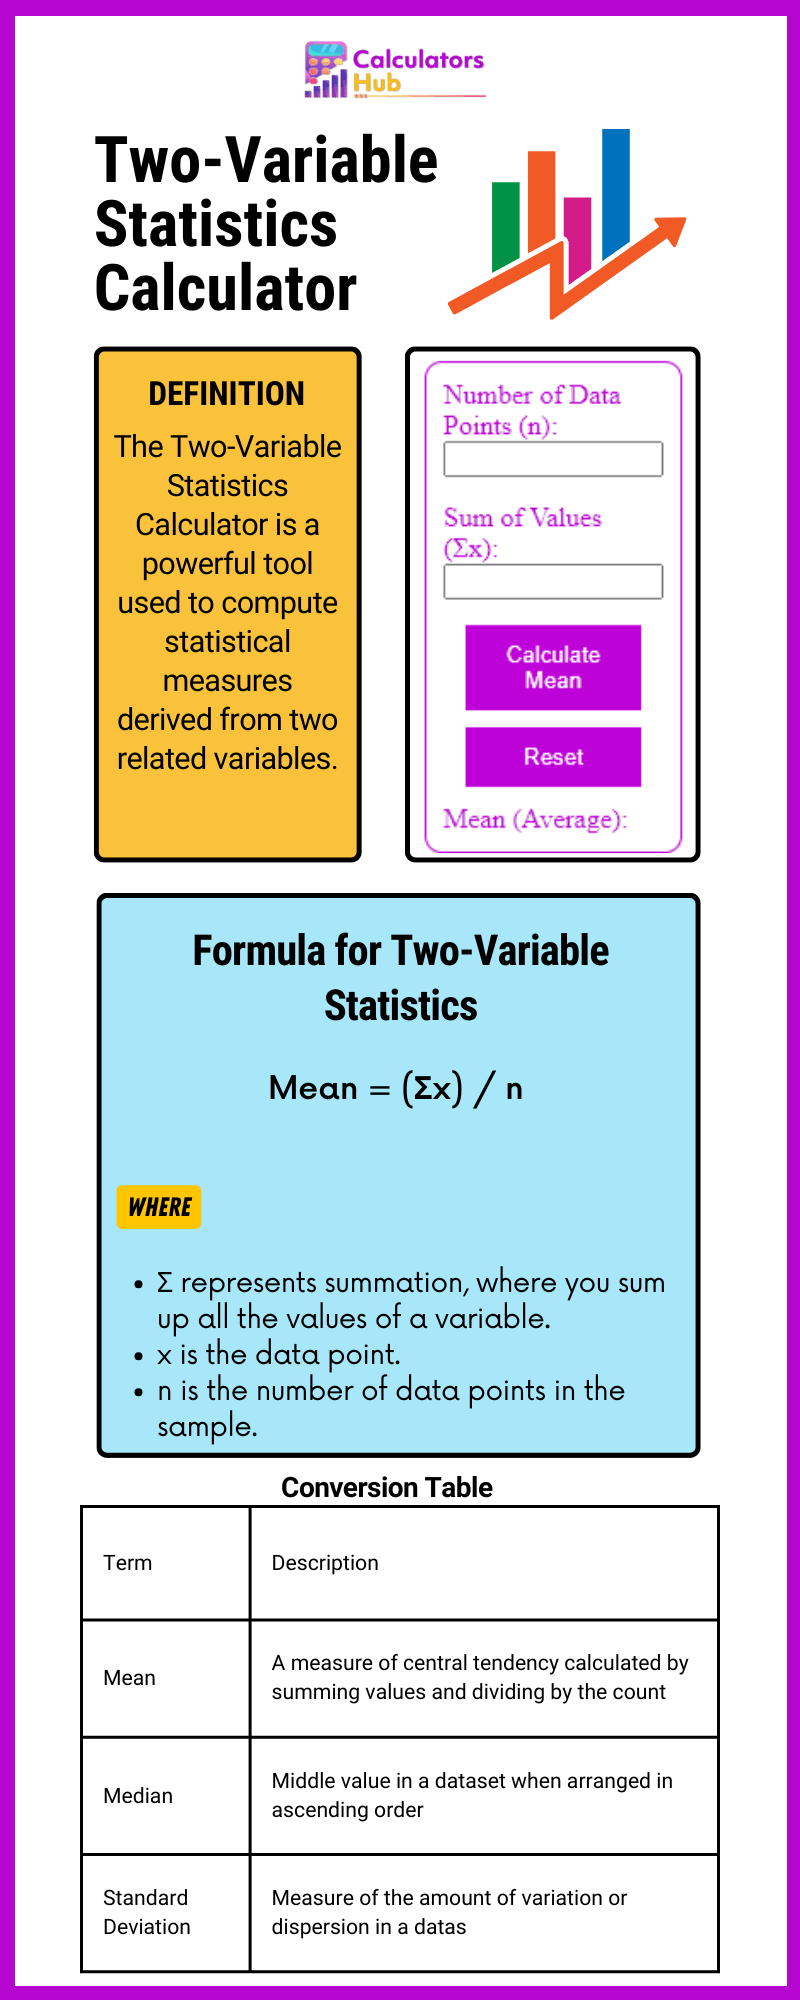 Two-Variable Statistics Calculator